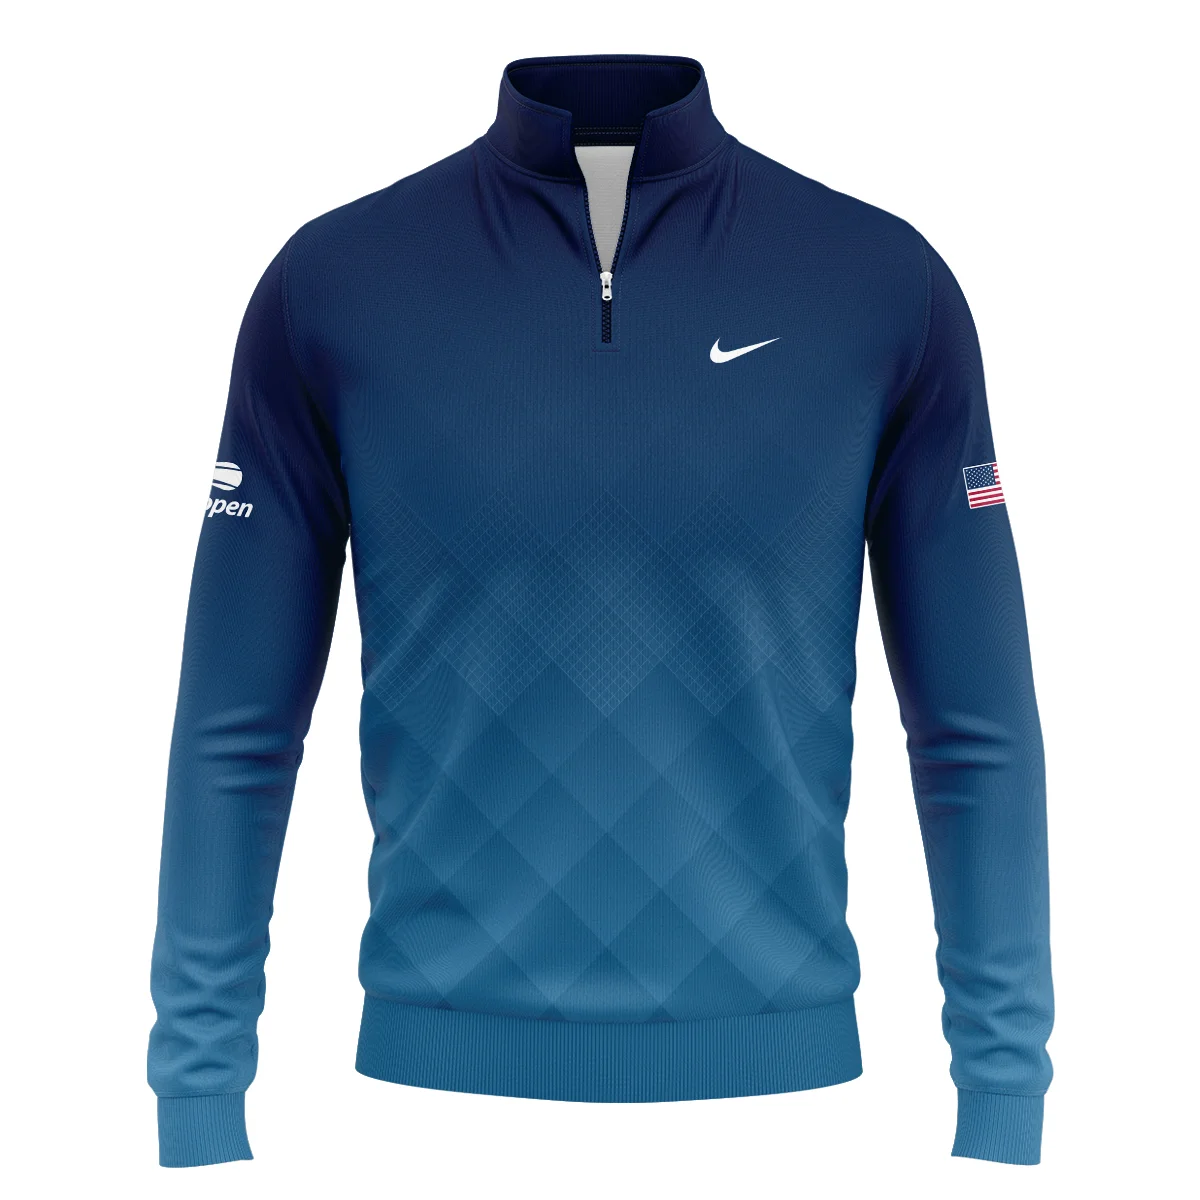 Nike Blue Abstract Background US Open Tennis Champions Hoodie Shirt Style Classic Hoodie Shirt